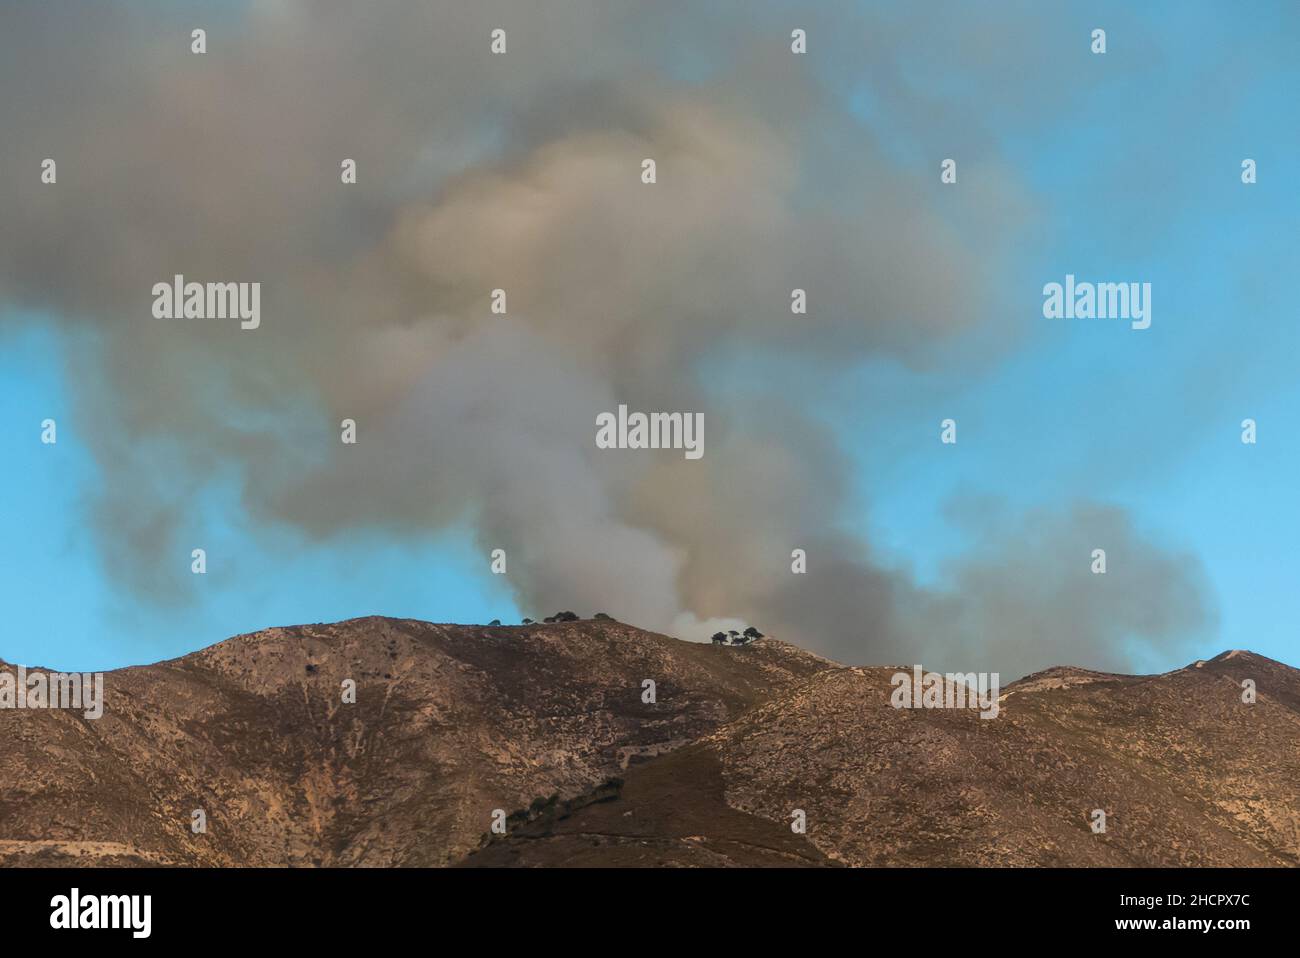 Axarquia in Spain: the December 2021 fire near Competa. Stock Photo